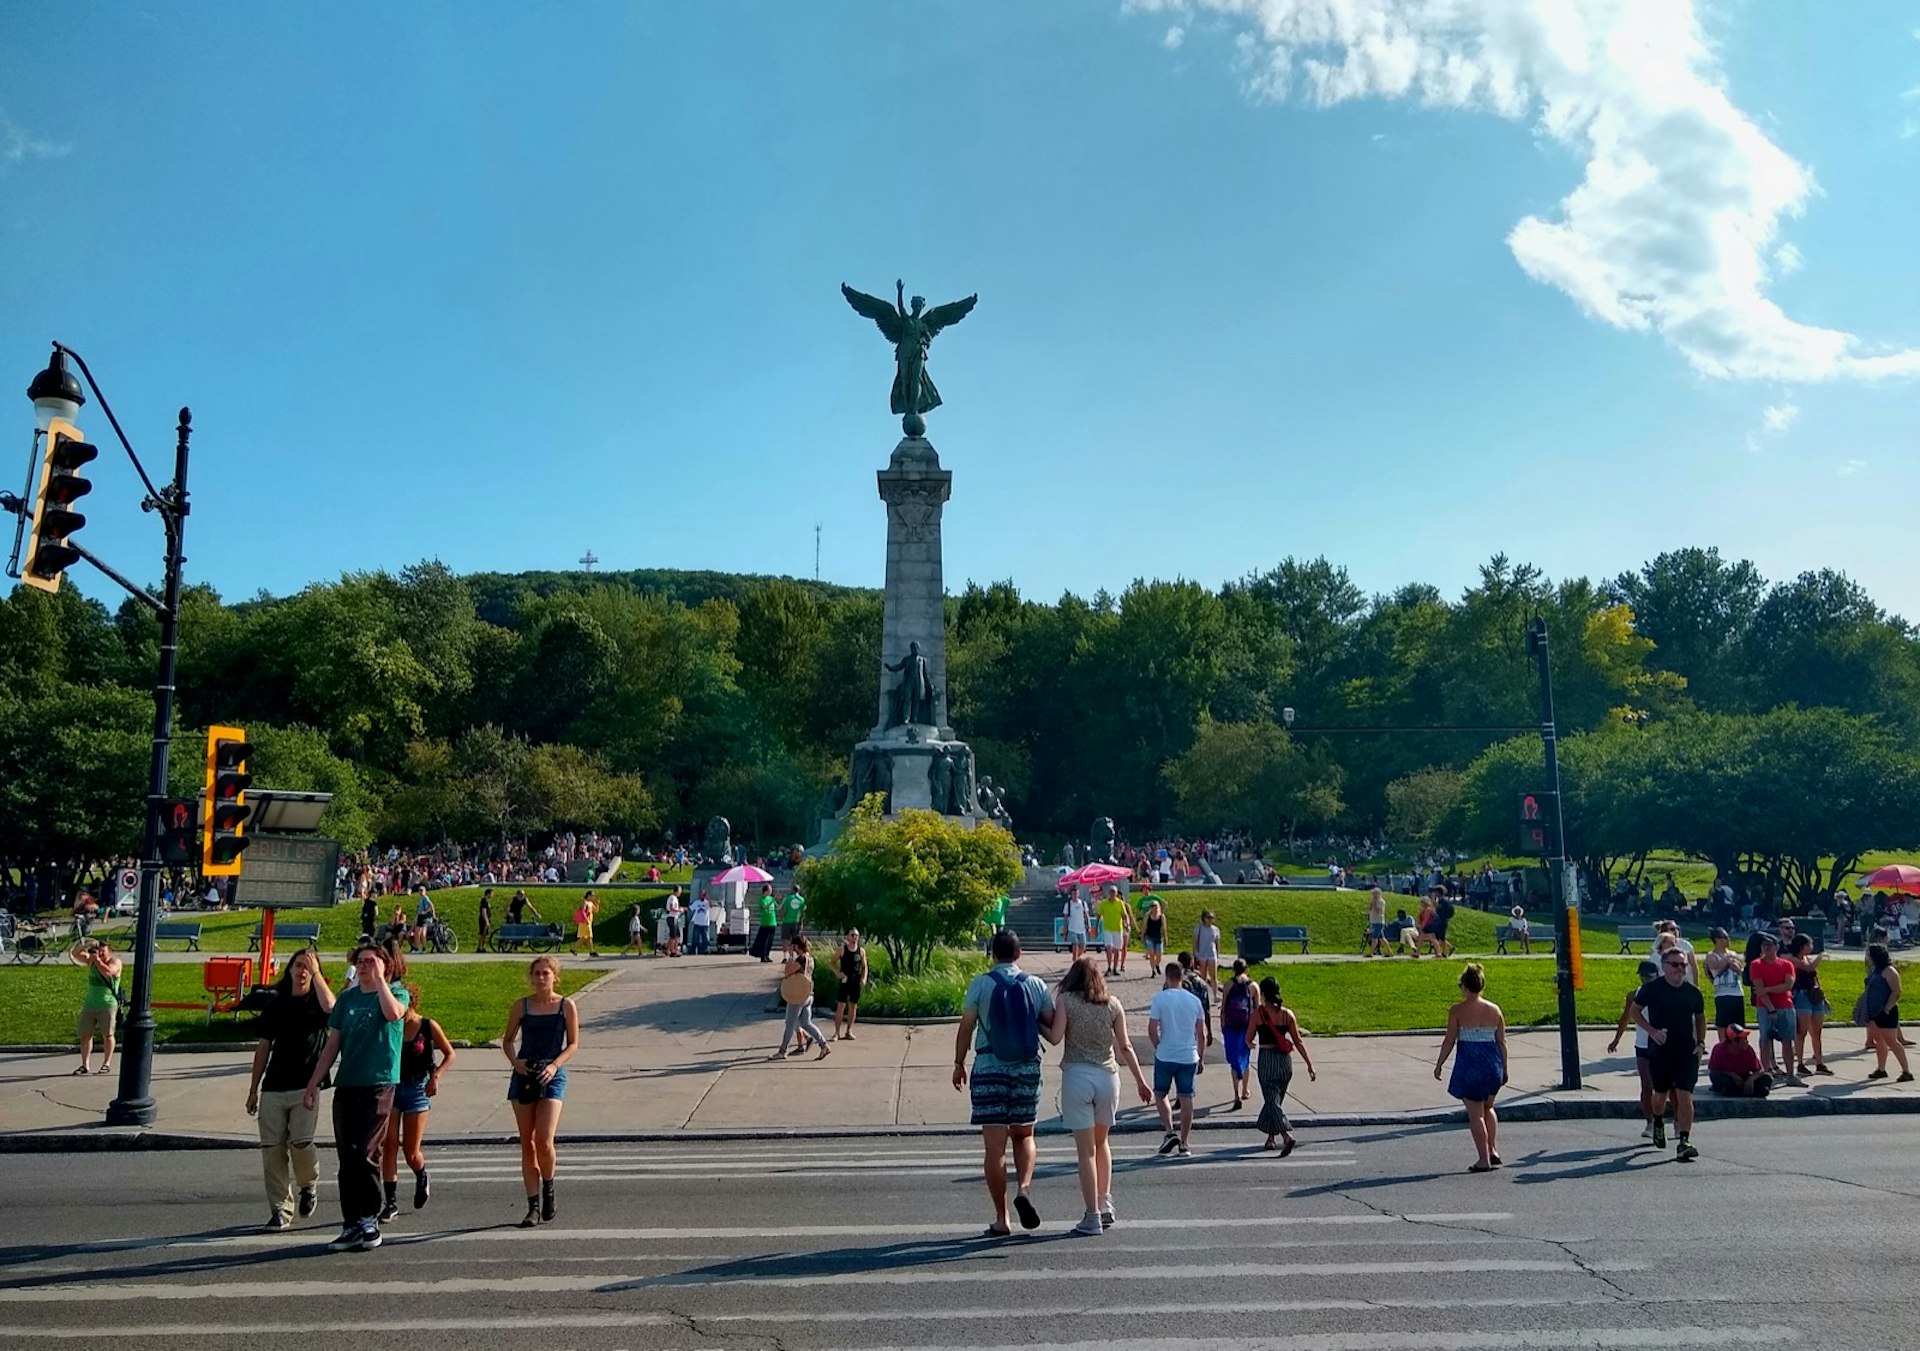 People walk across a street toward a park with a large statue in the middle topped by a winged figure; free things to do in Montréal